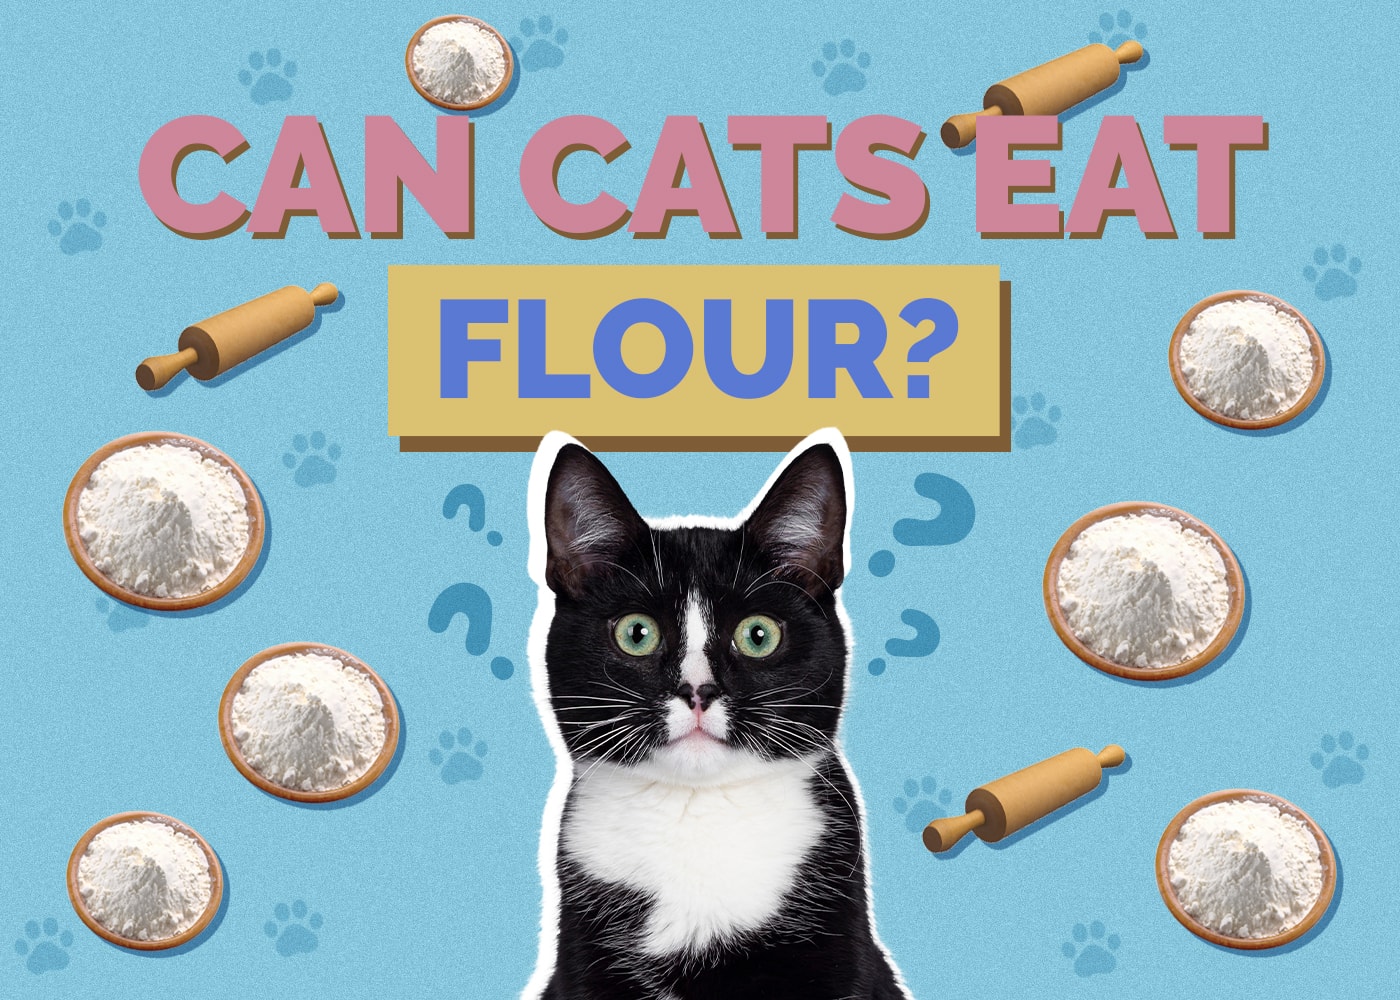 Can Cats Eat flour